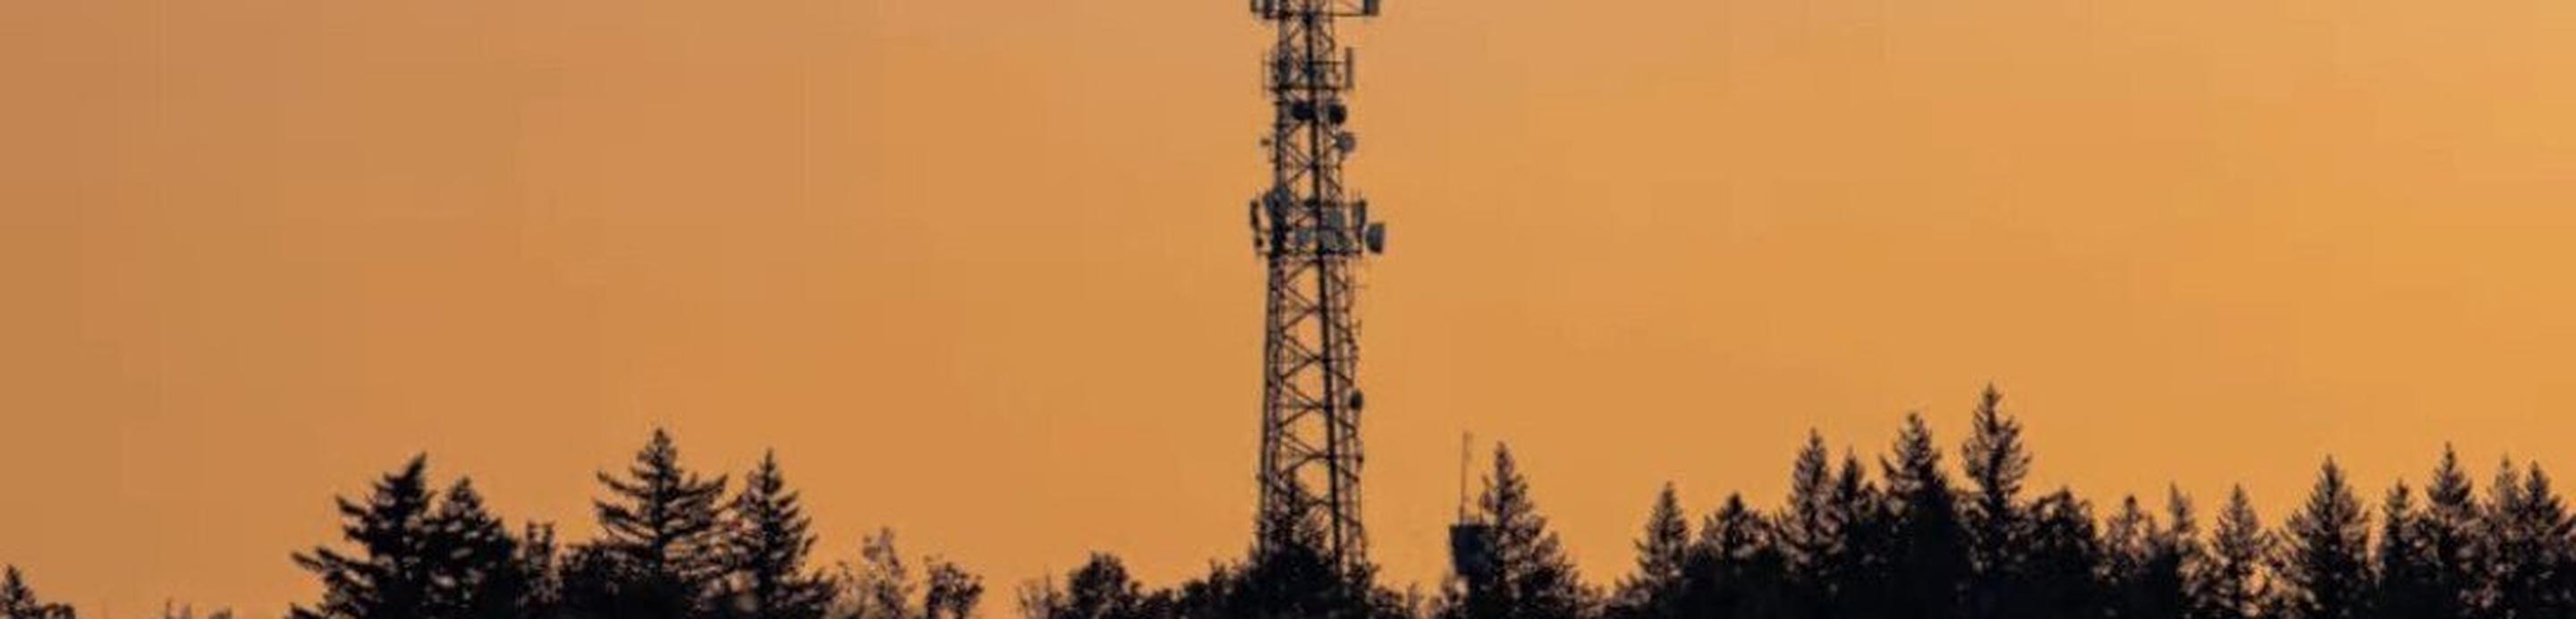 cell phone network tower